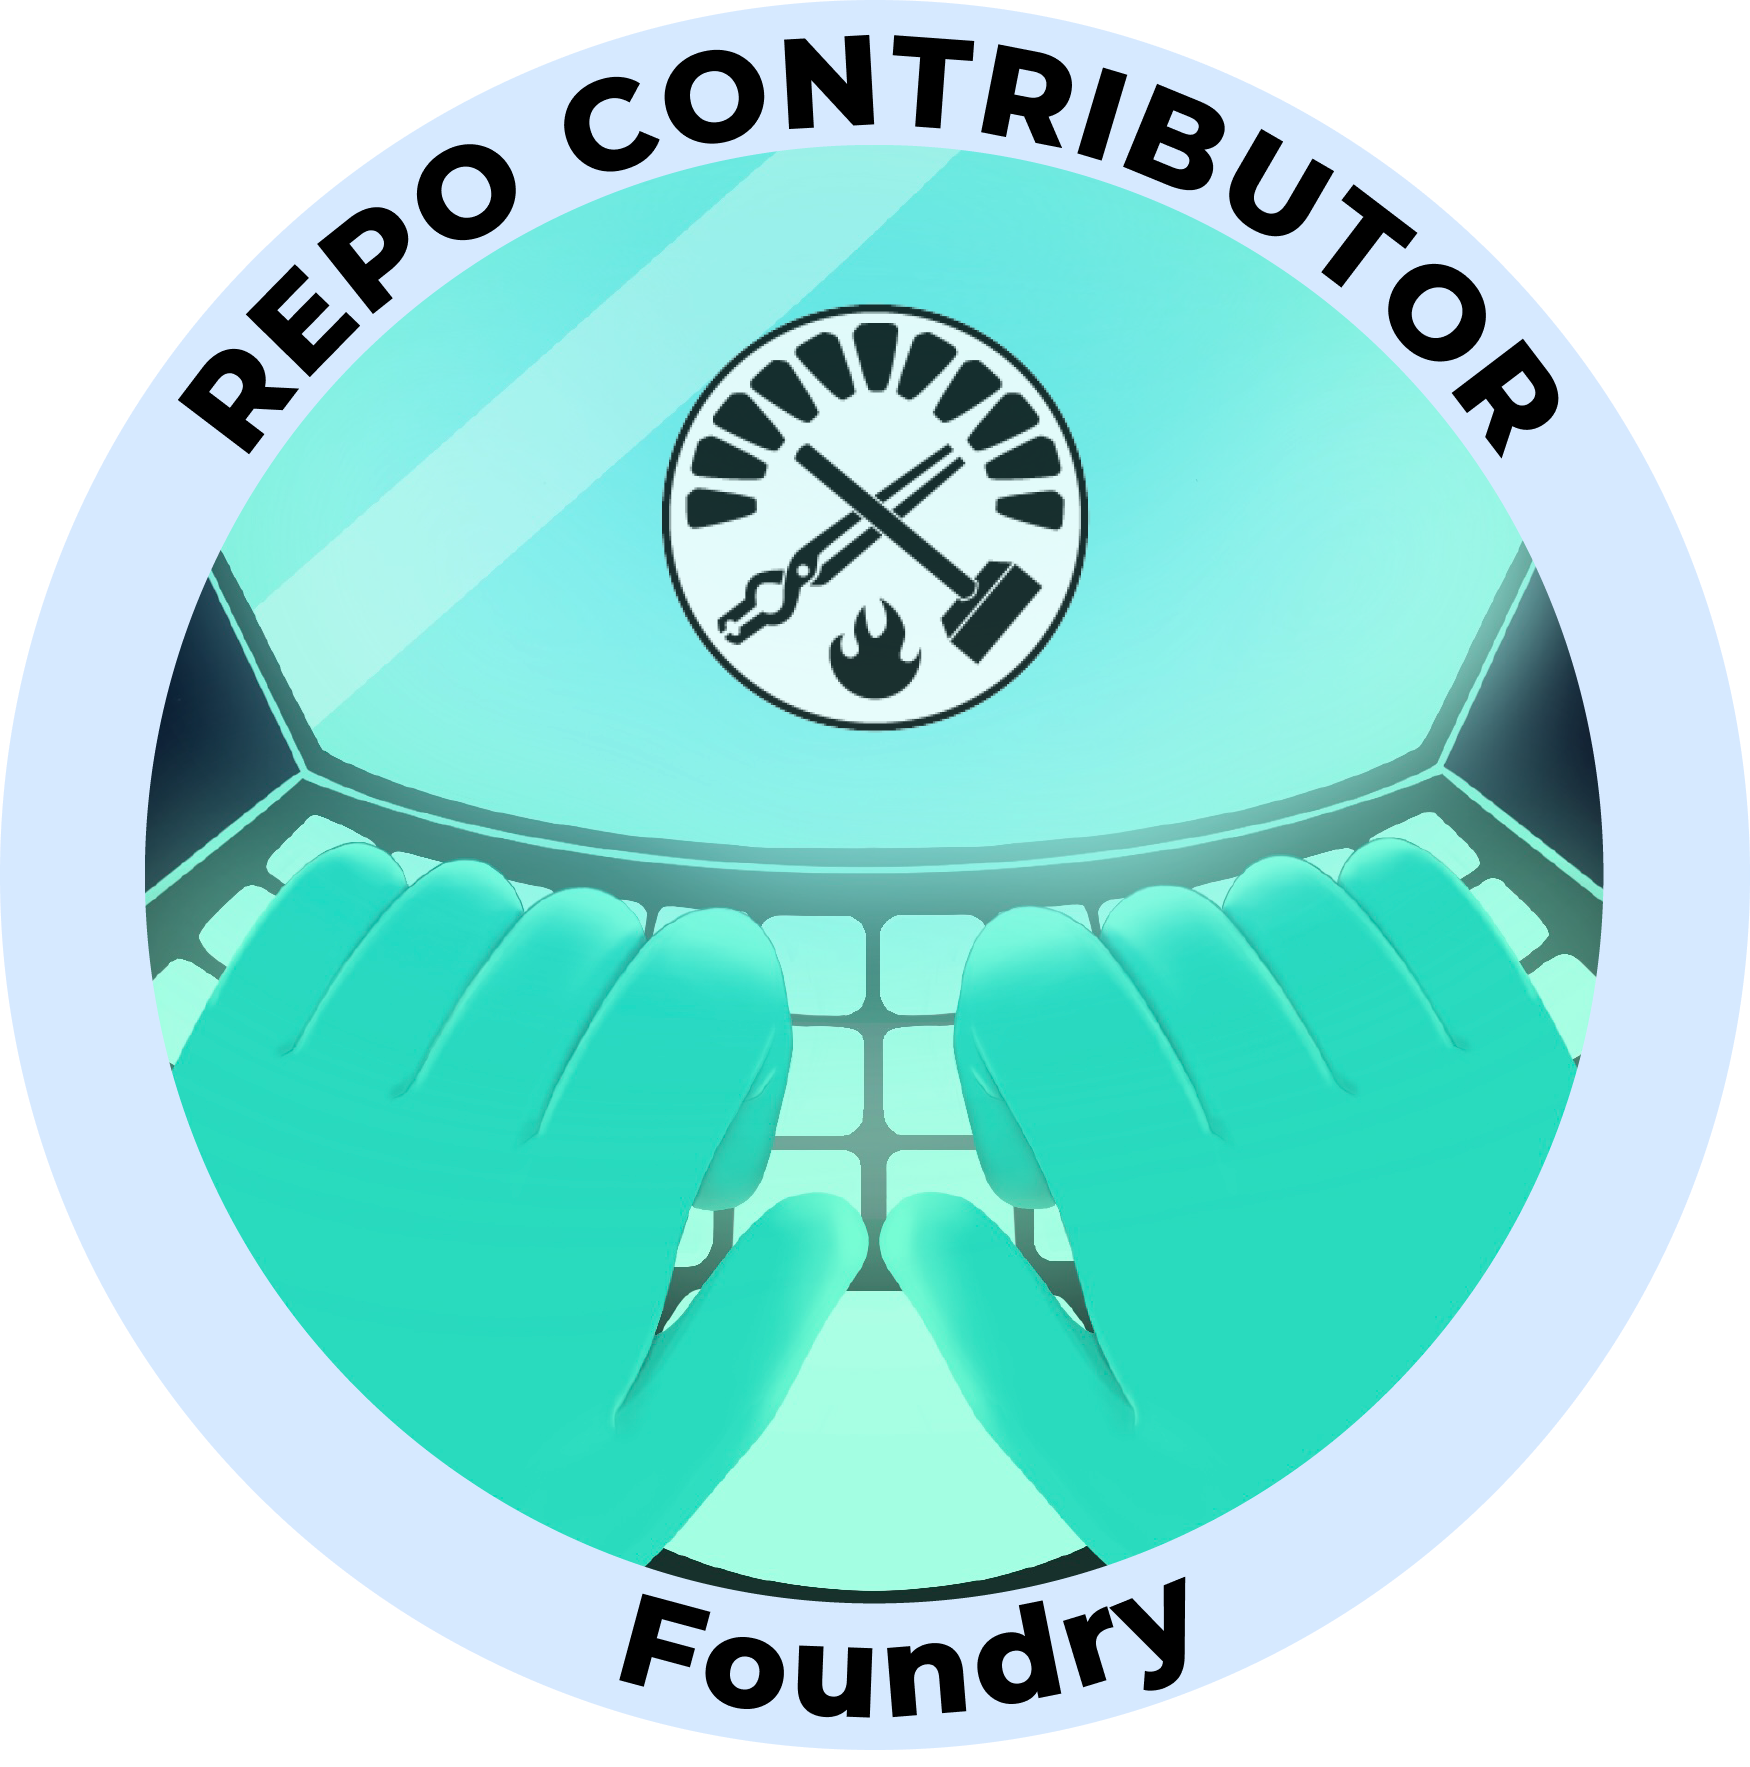 Web3 Badge | Project Contributor: Foundry logo